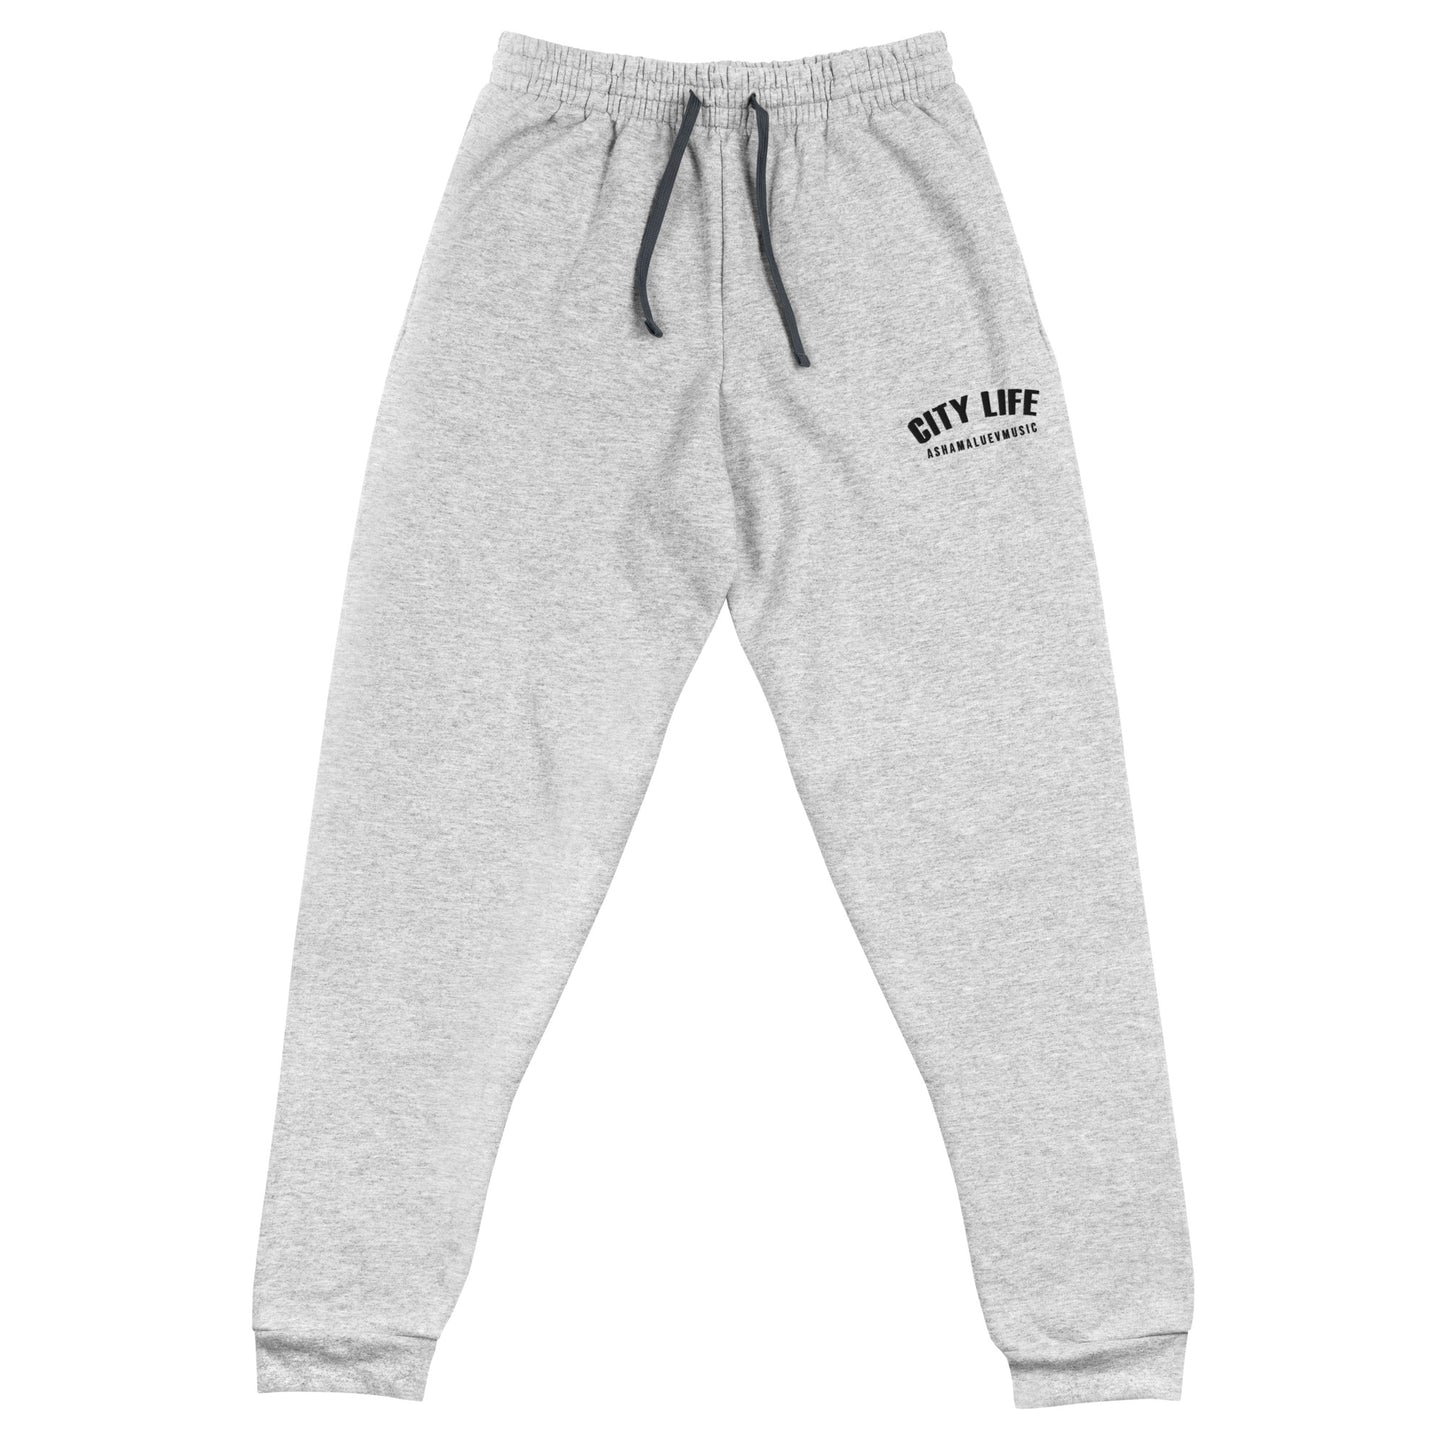 Joggers "City Life" (Embroidery)